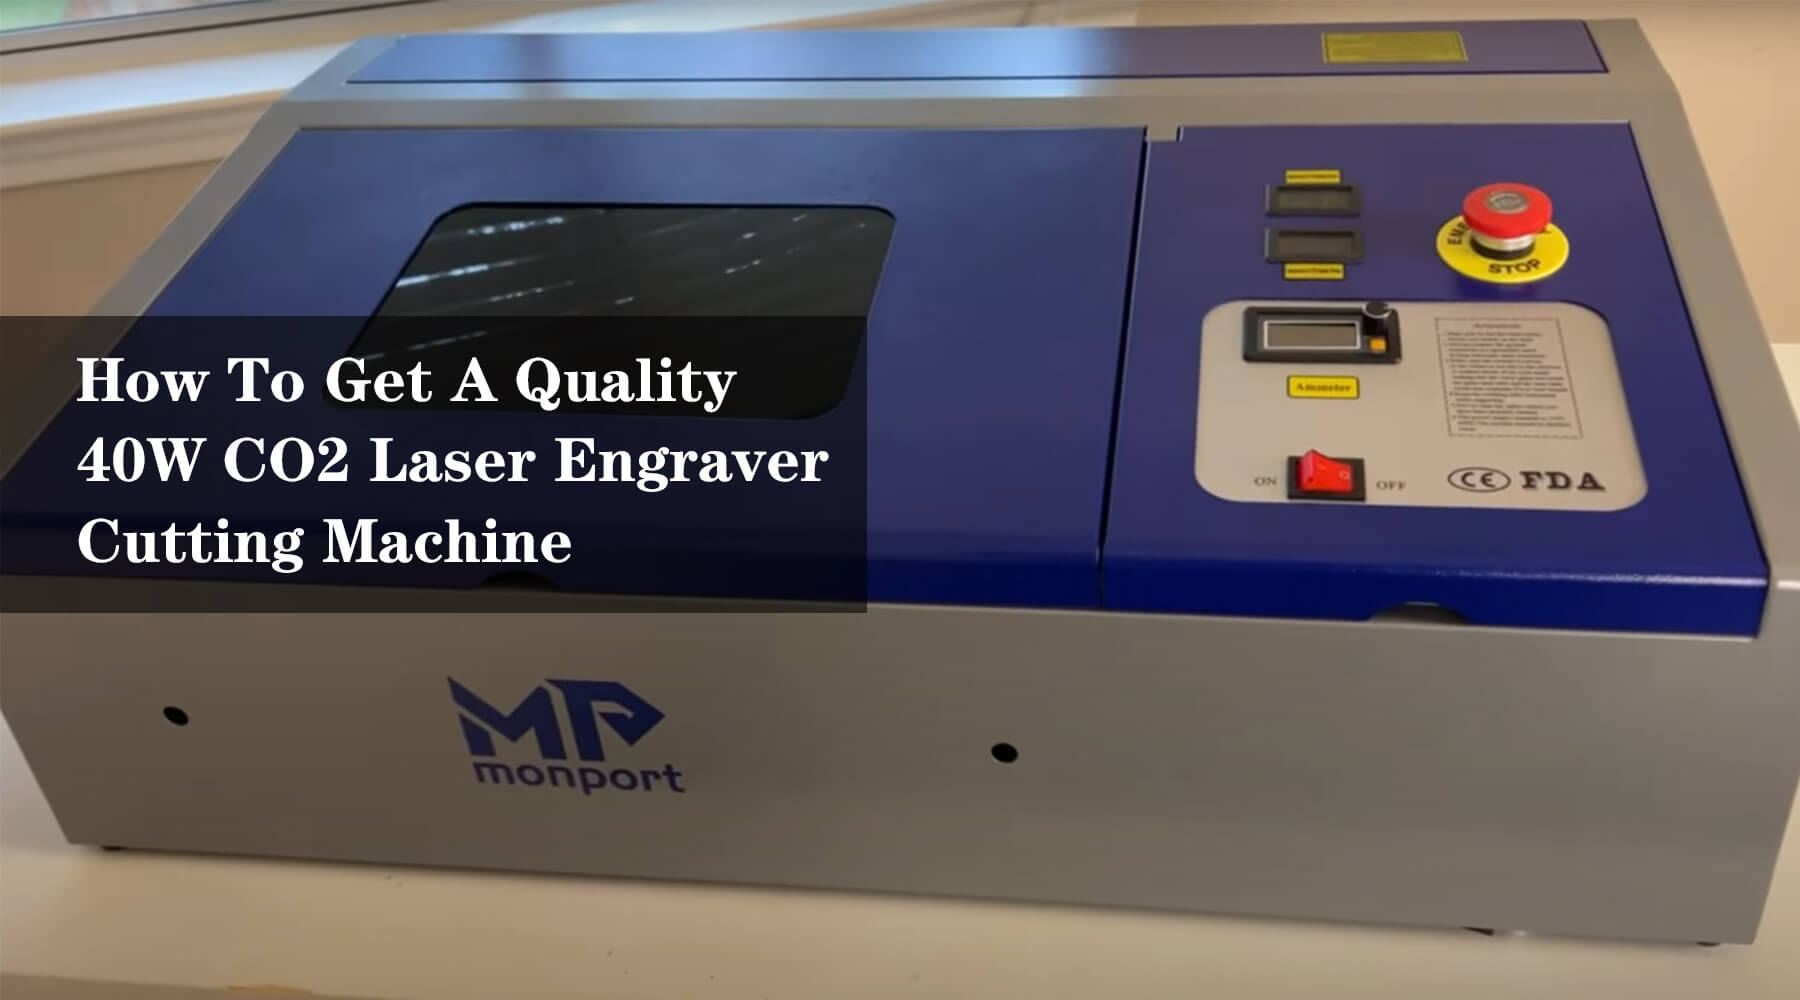 How To Get A Quality 40W CO2 Laser Engraver Cutting Machine